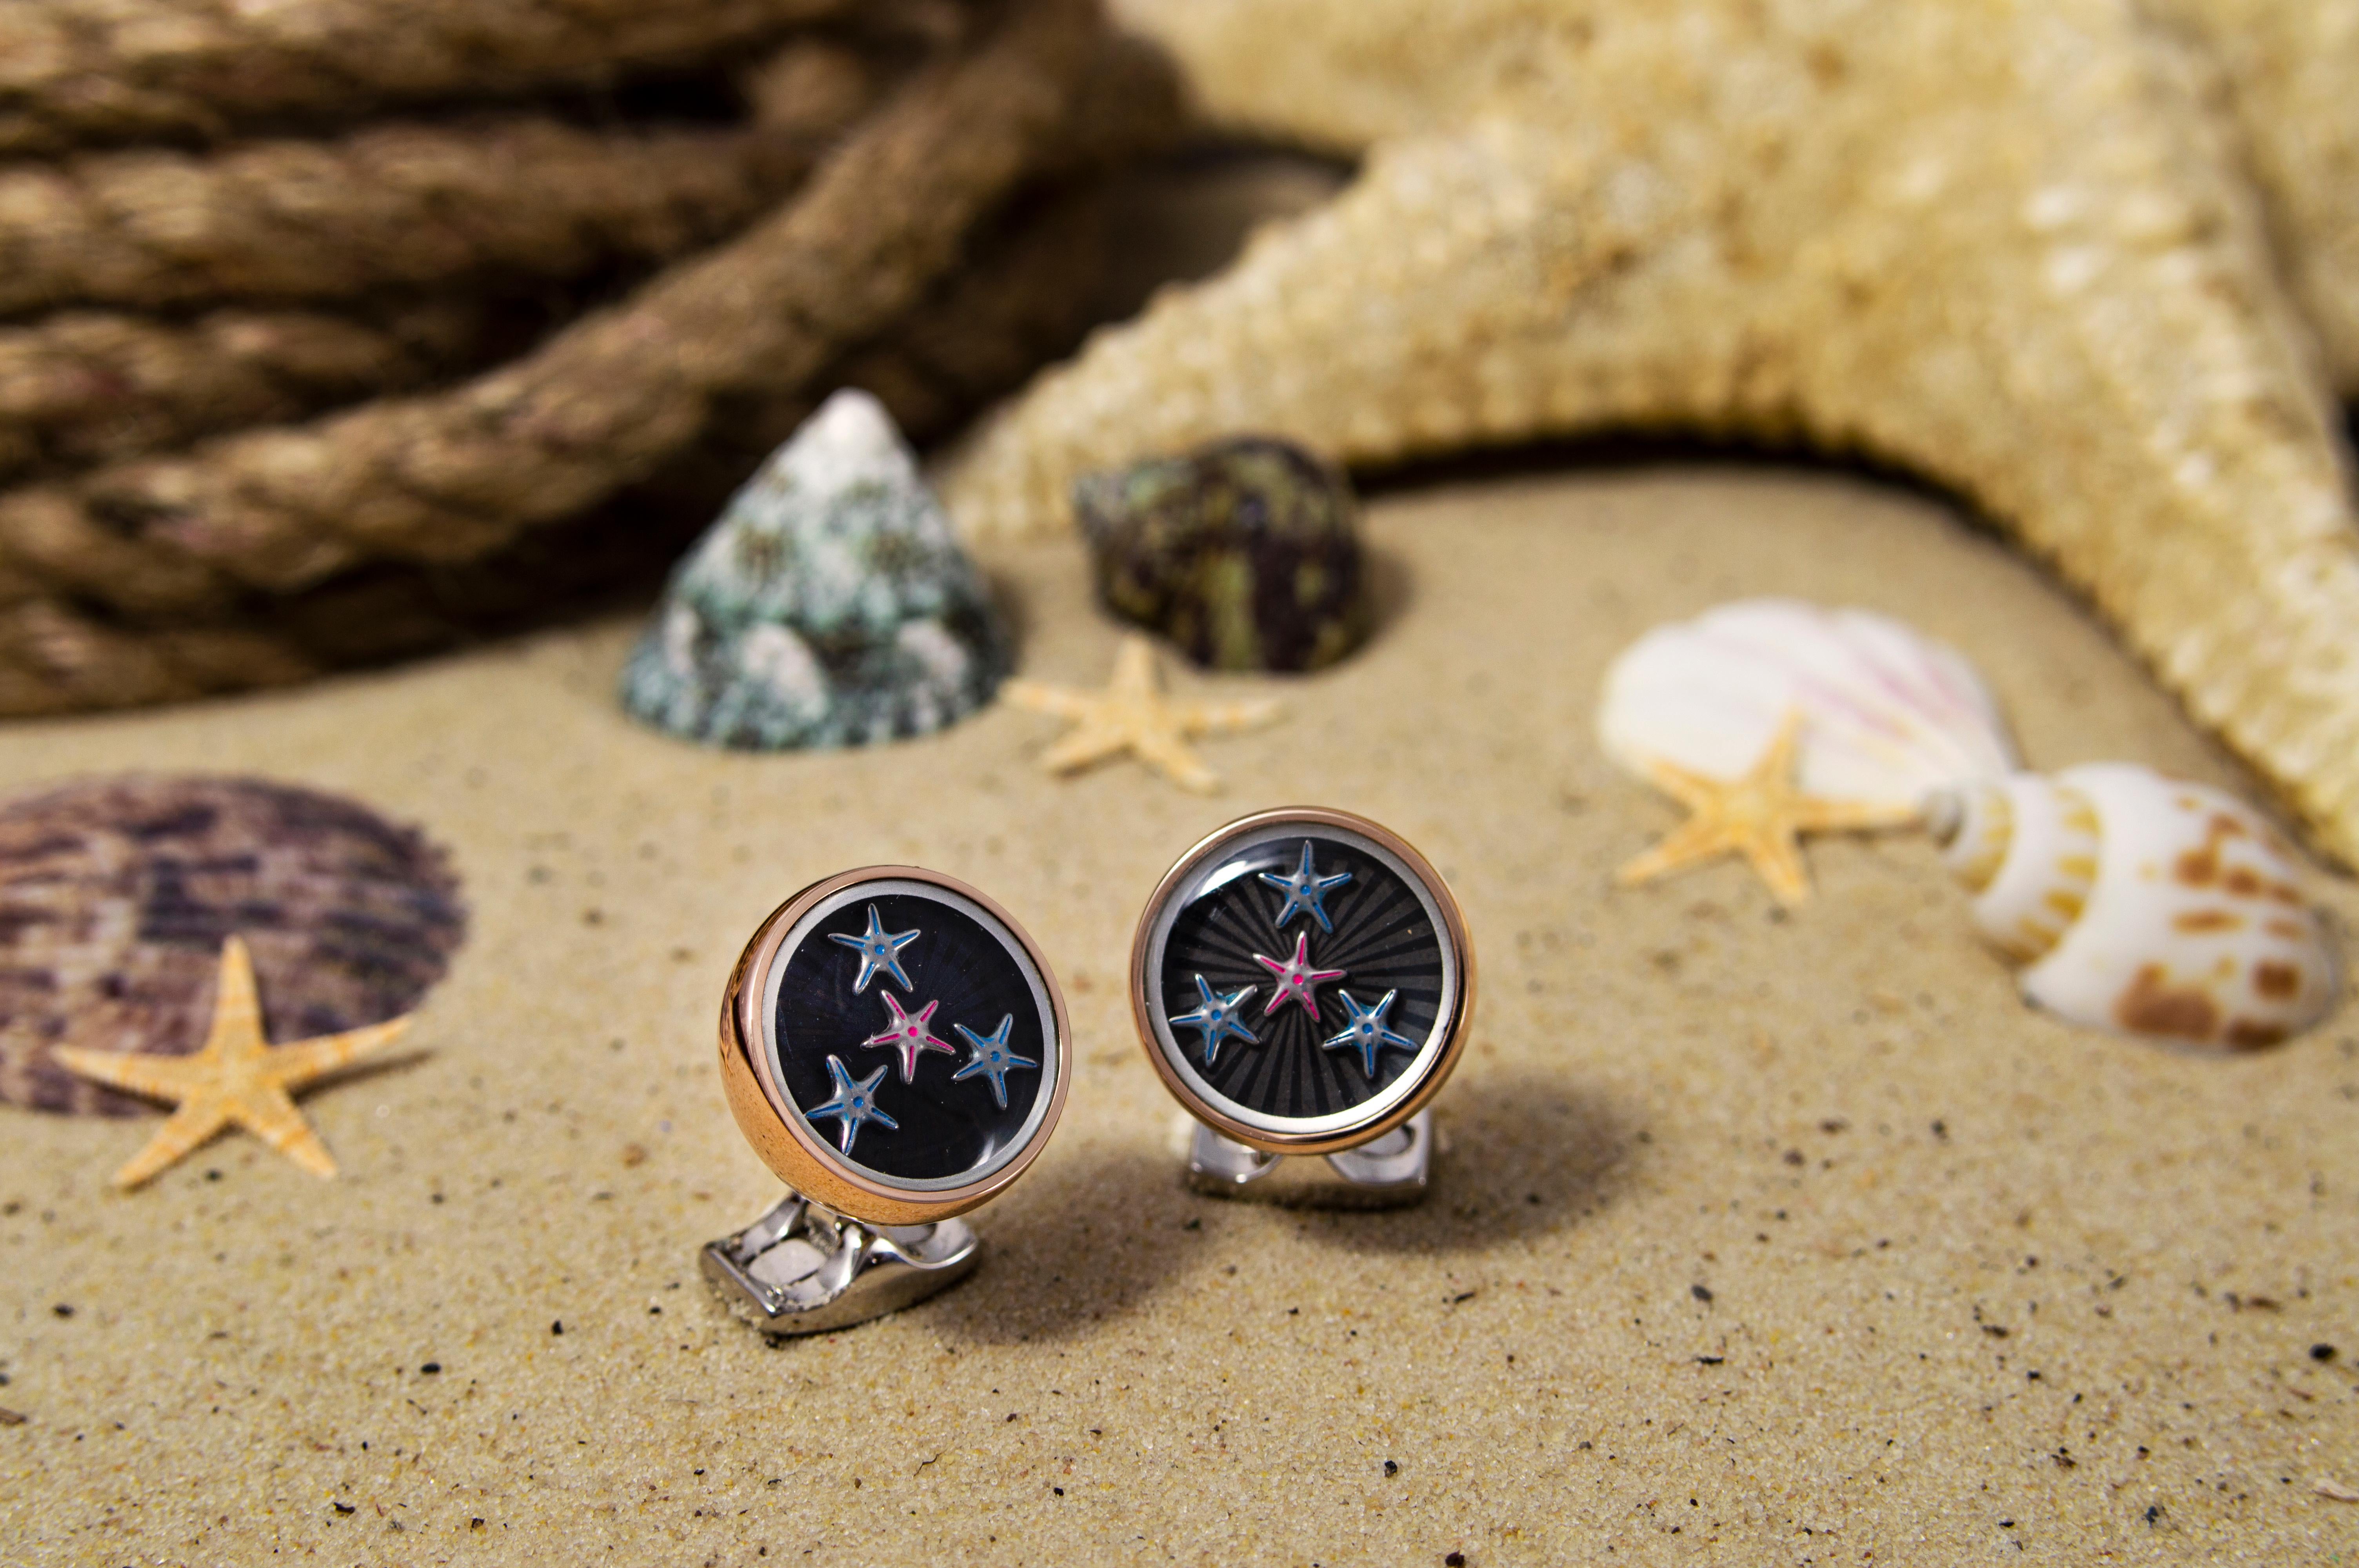 DEAKIN & FRANCIS, Piccadilly Arcade, London

Oh we do like to be beside the seaside – and even more so when sporting a pair of our nautical themed cufflinks!

With four brightly coloured starfish, set against a striking rich black inlay, these round